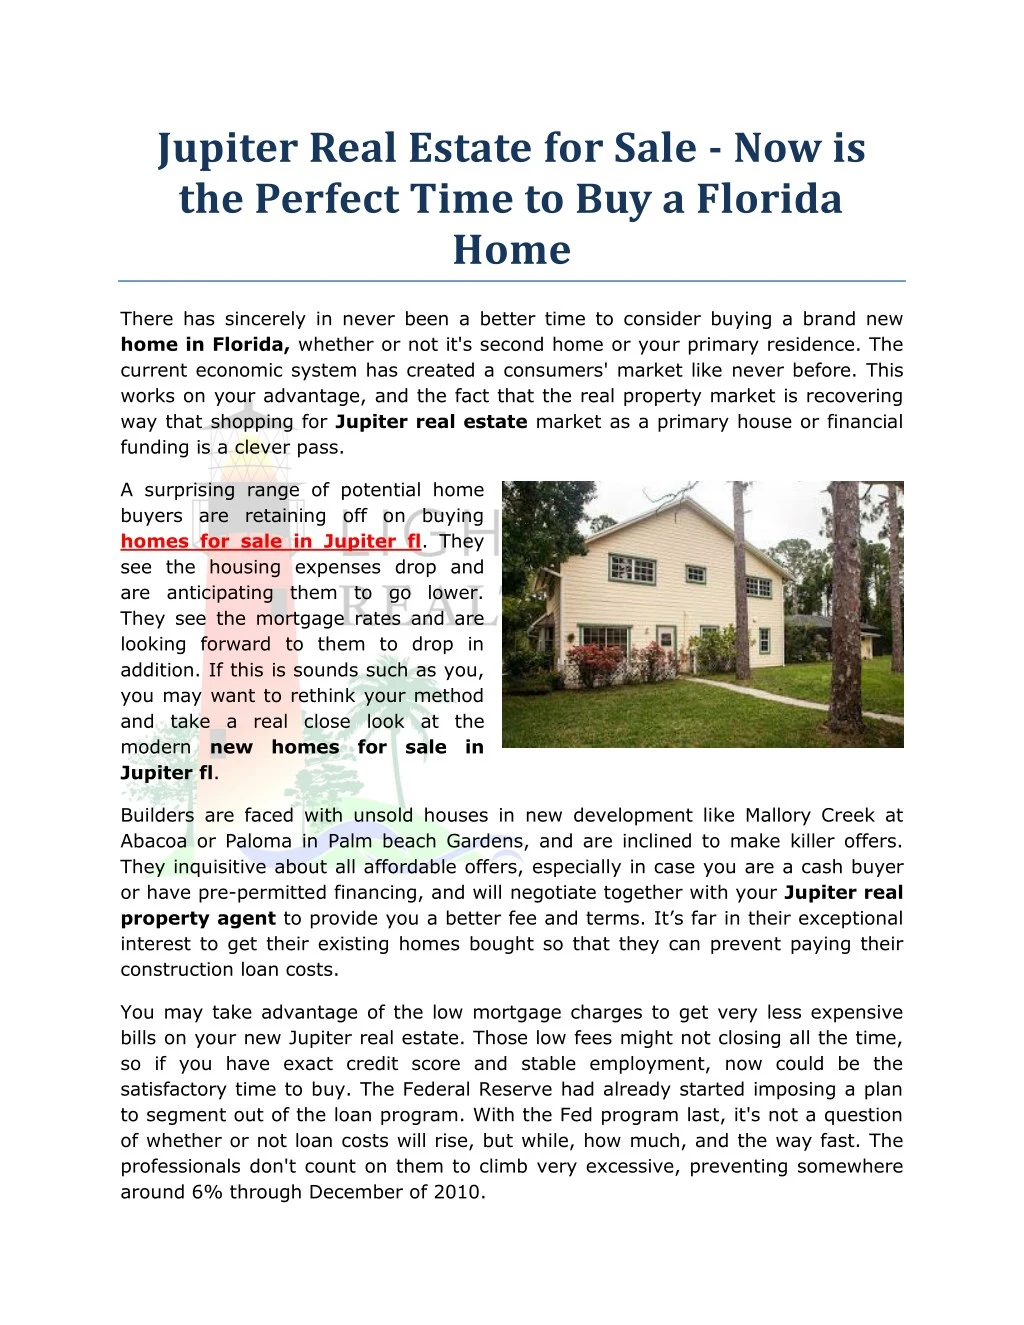 jupiter real estate for sale now is the perfect